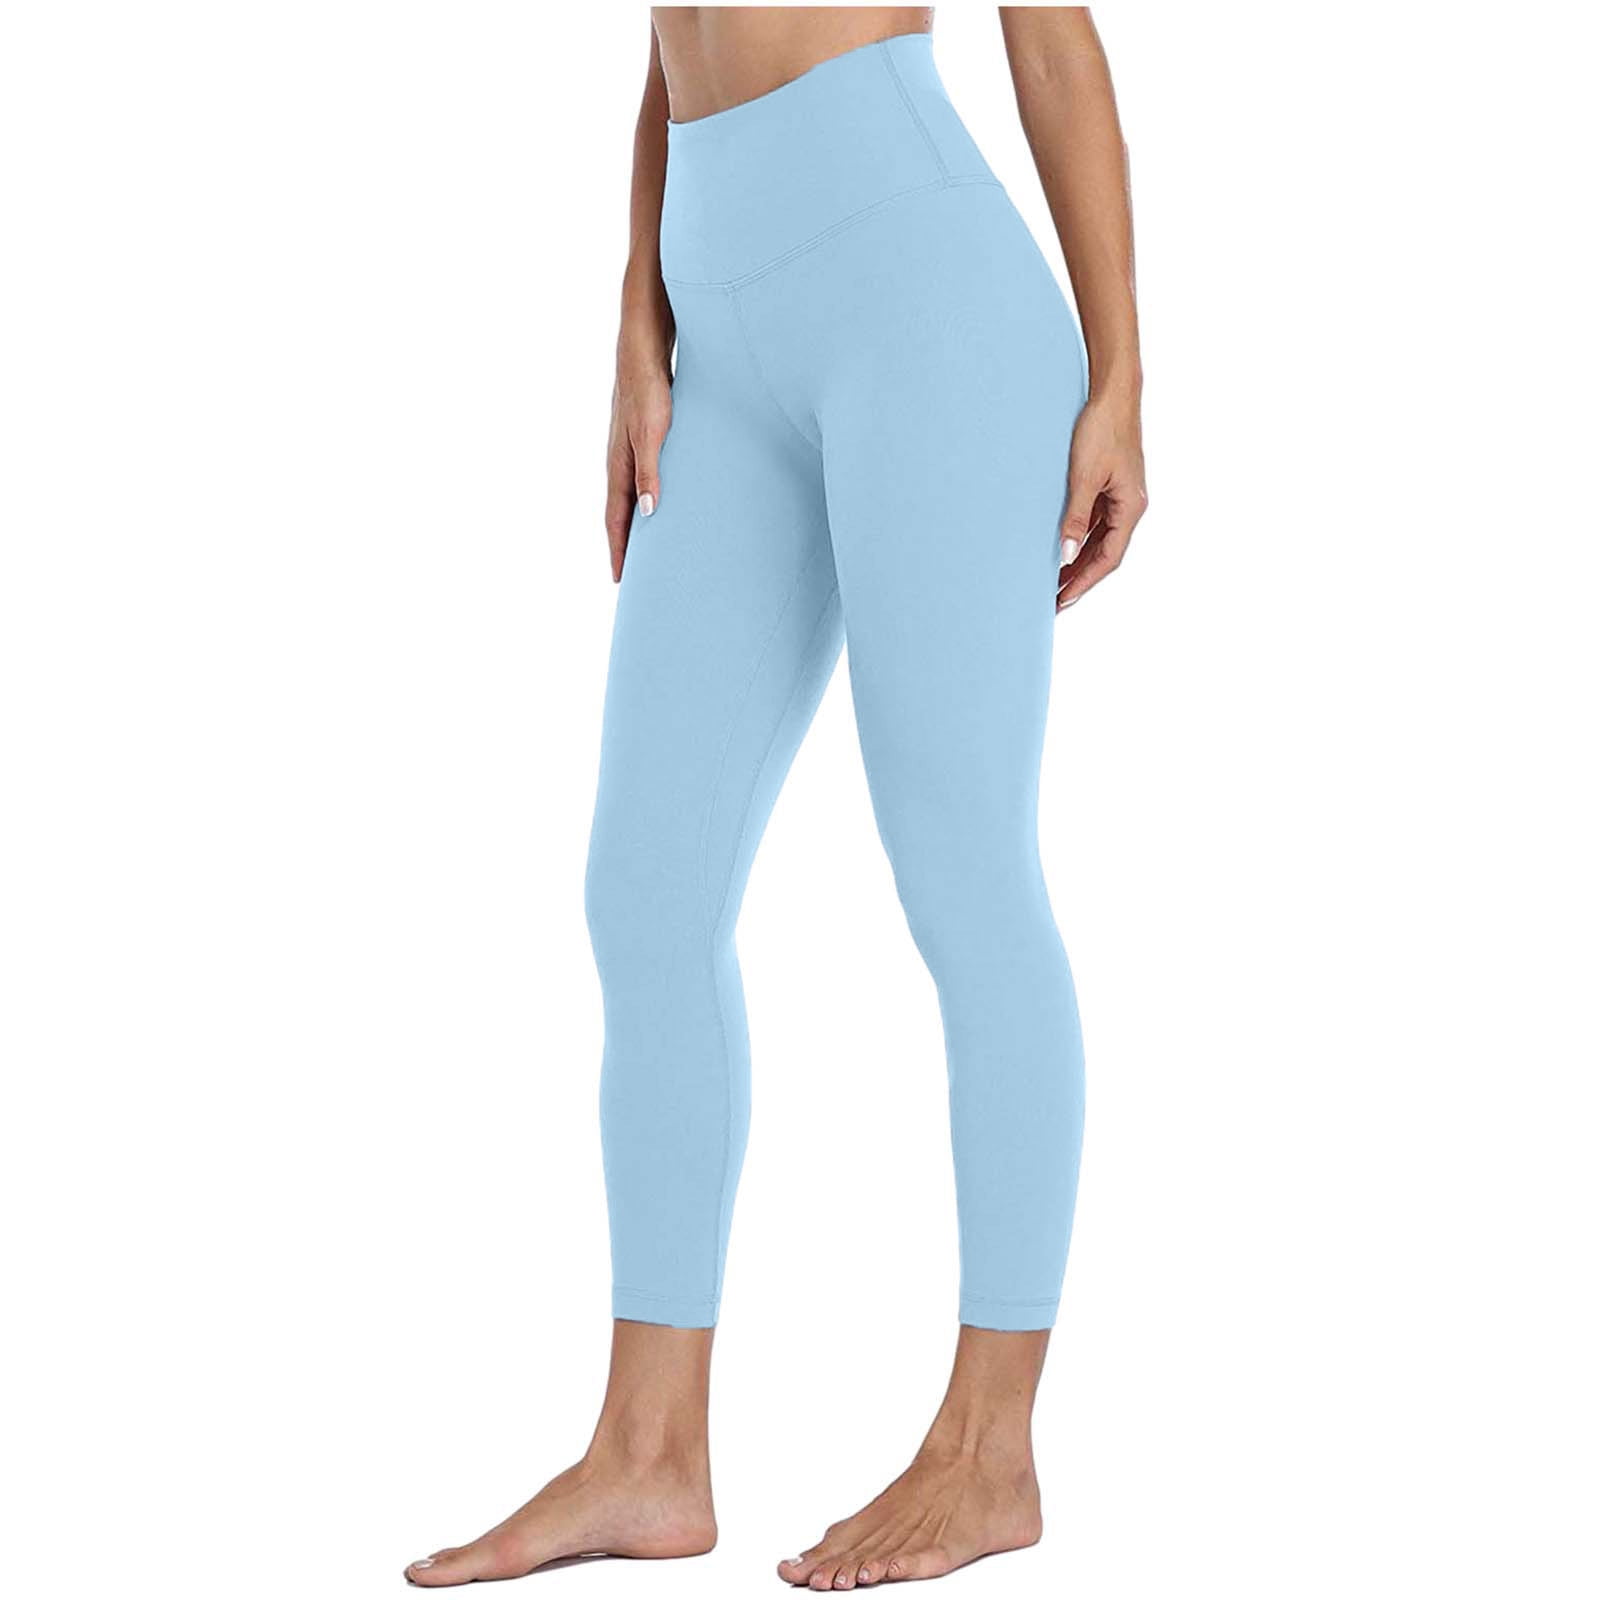 HAPIMO Discount Women's Yoga Pants Tummy Control High Waist Hip Lift Tights  Stretch Athletic Workout Pants Slimming Running Yoga Leggings for Women  Light blue M 